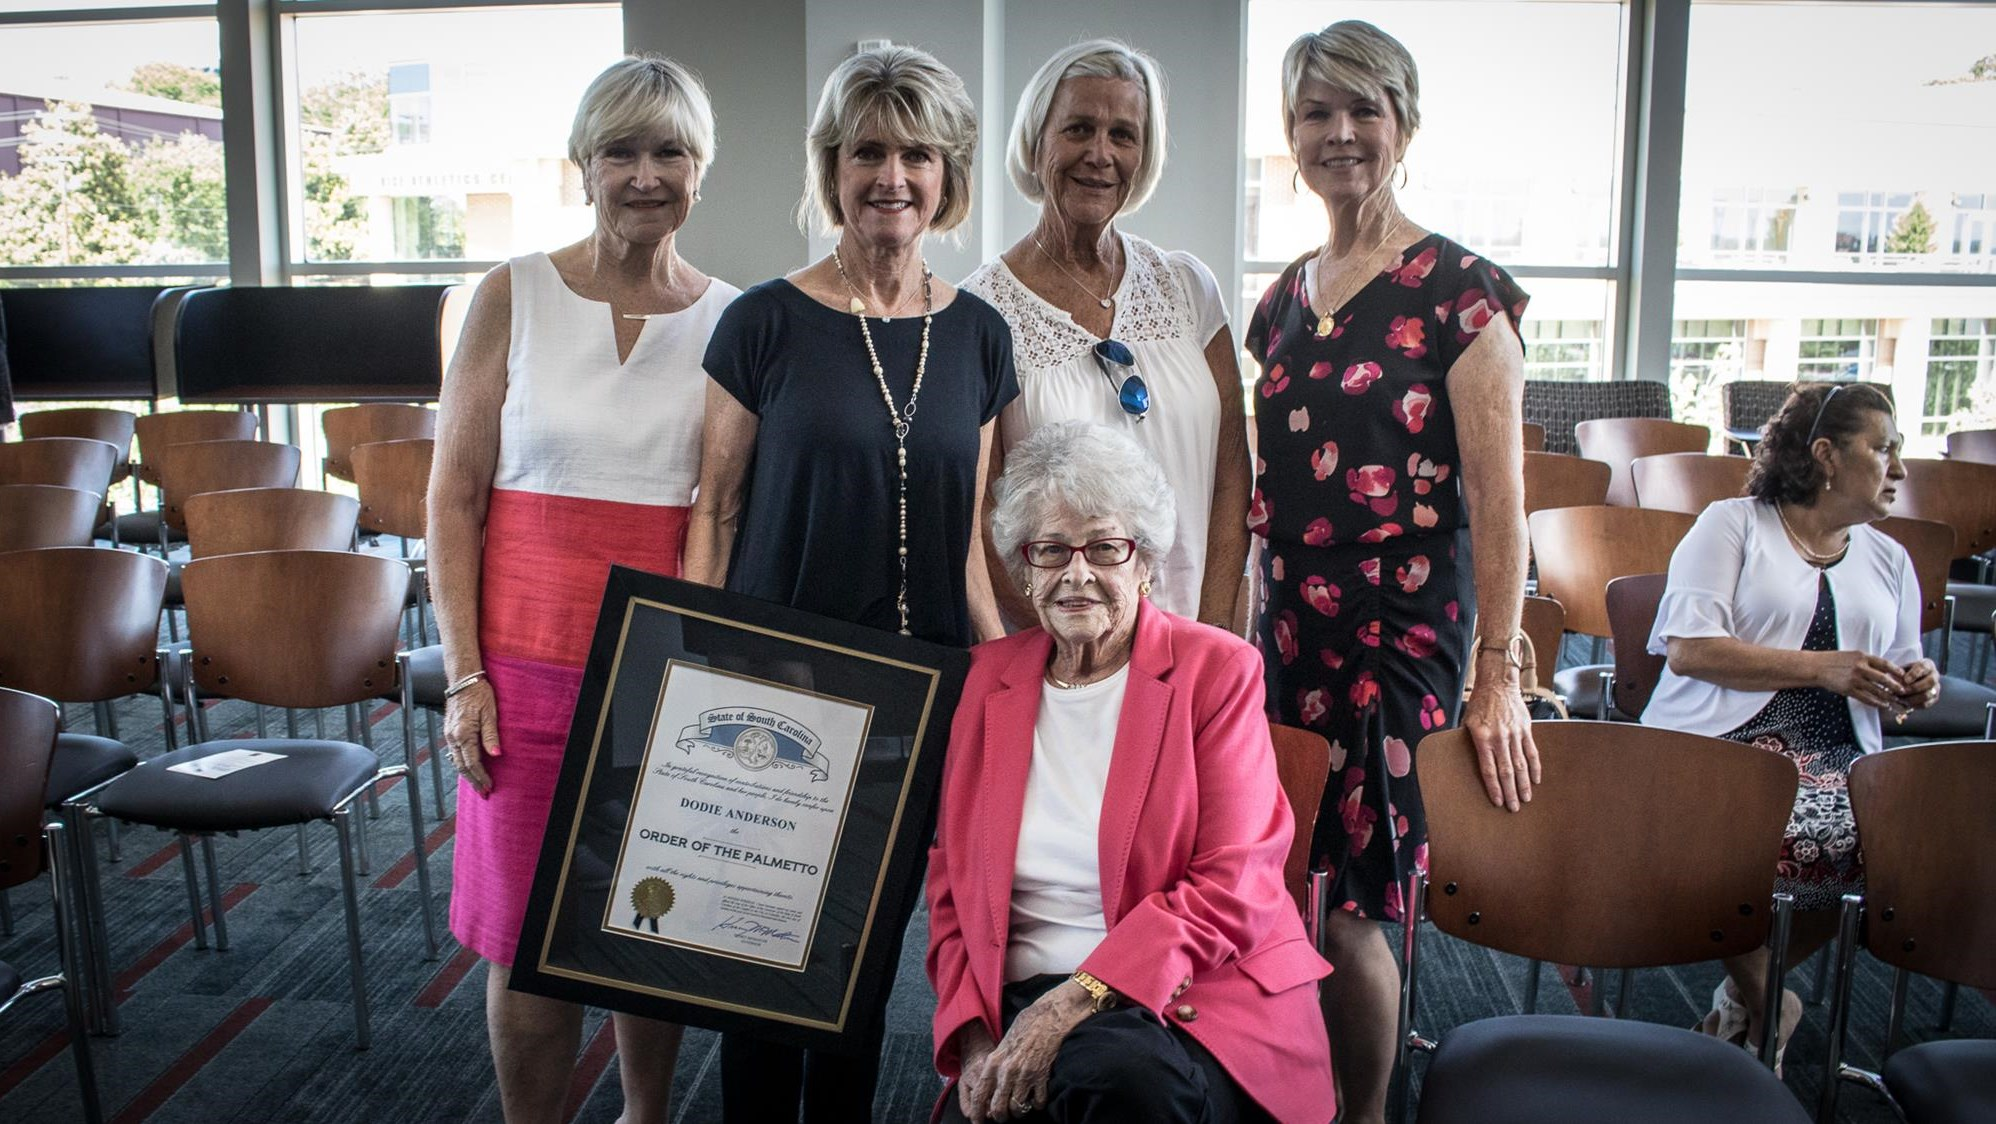 Dodie Anderson Honored With The Order of the Palmetto Award